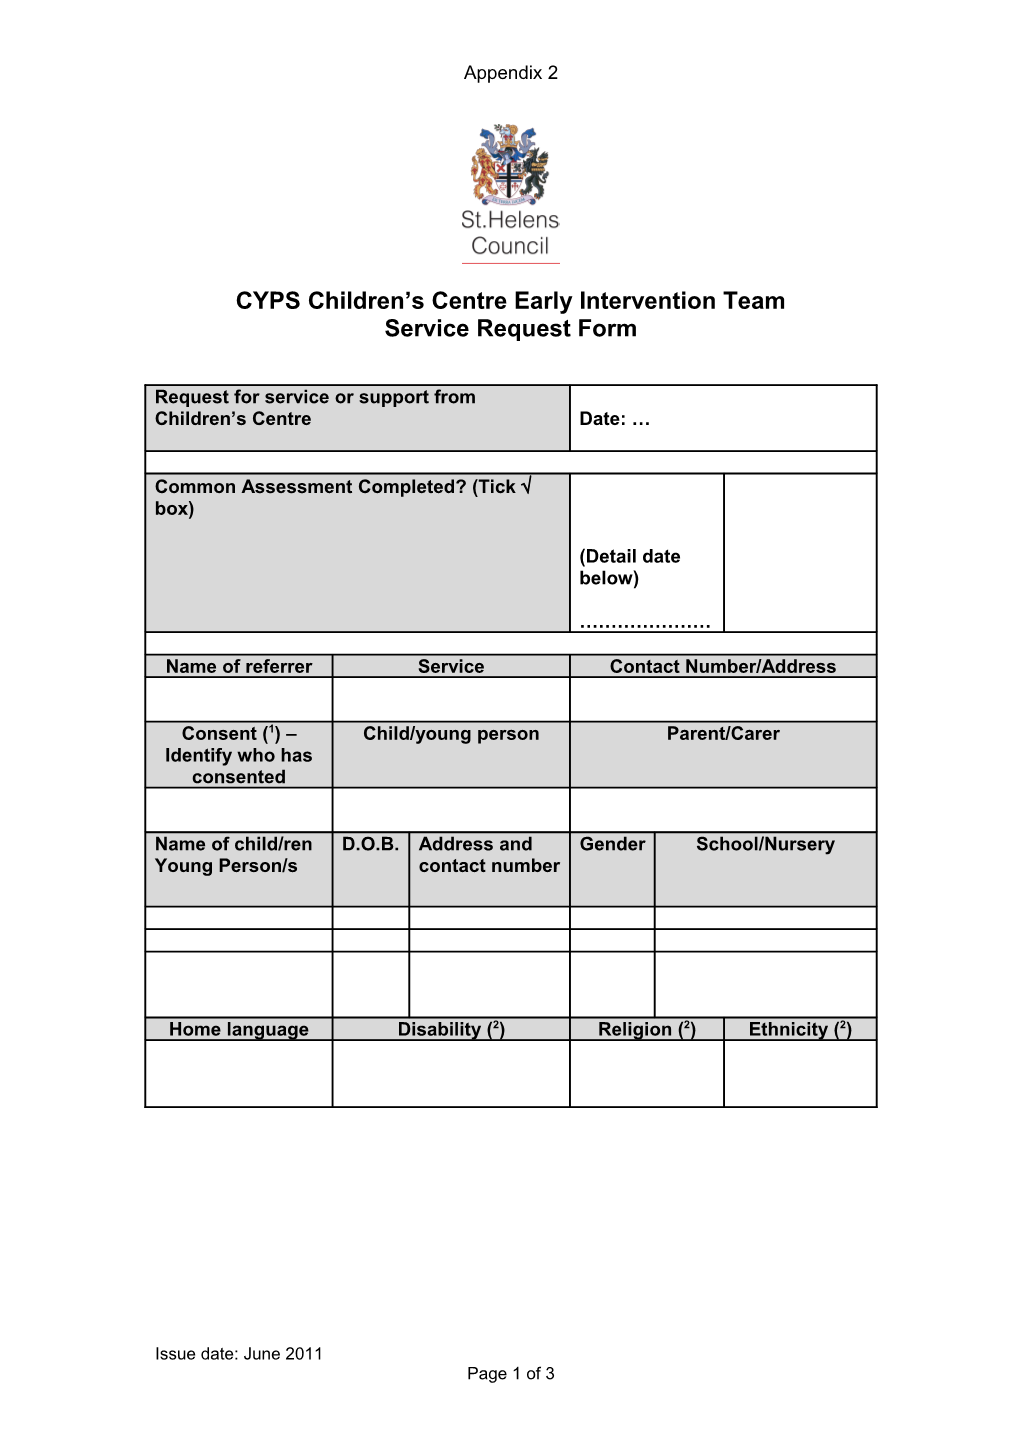 CYPS First Response Service Request Form